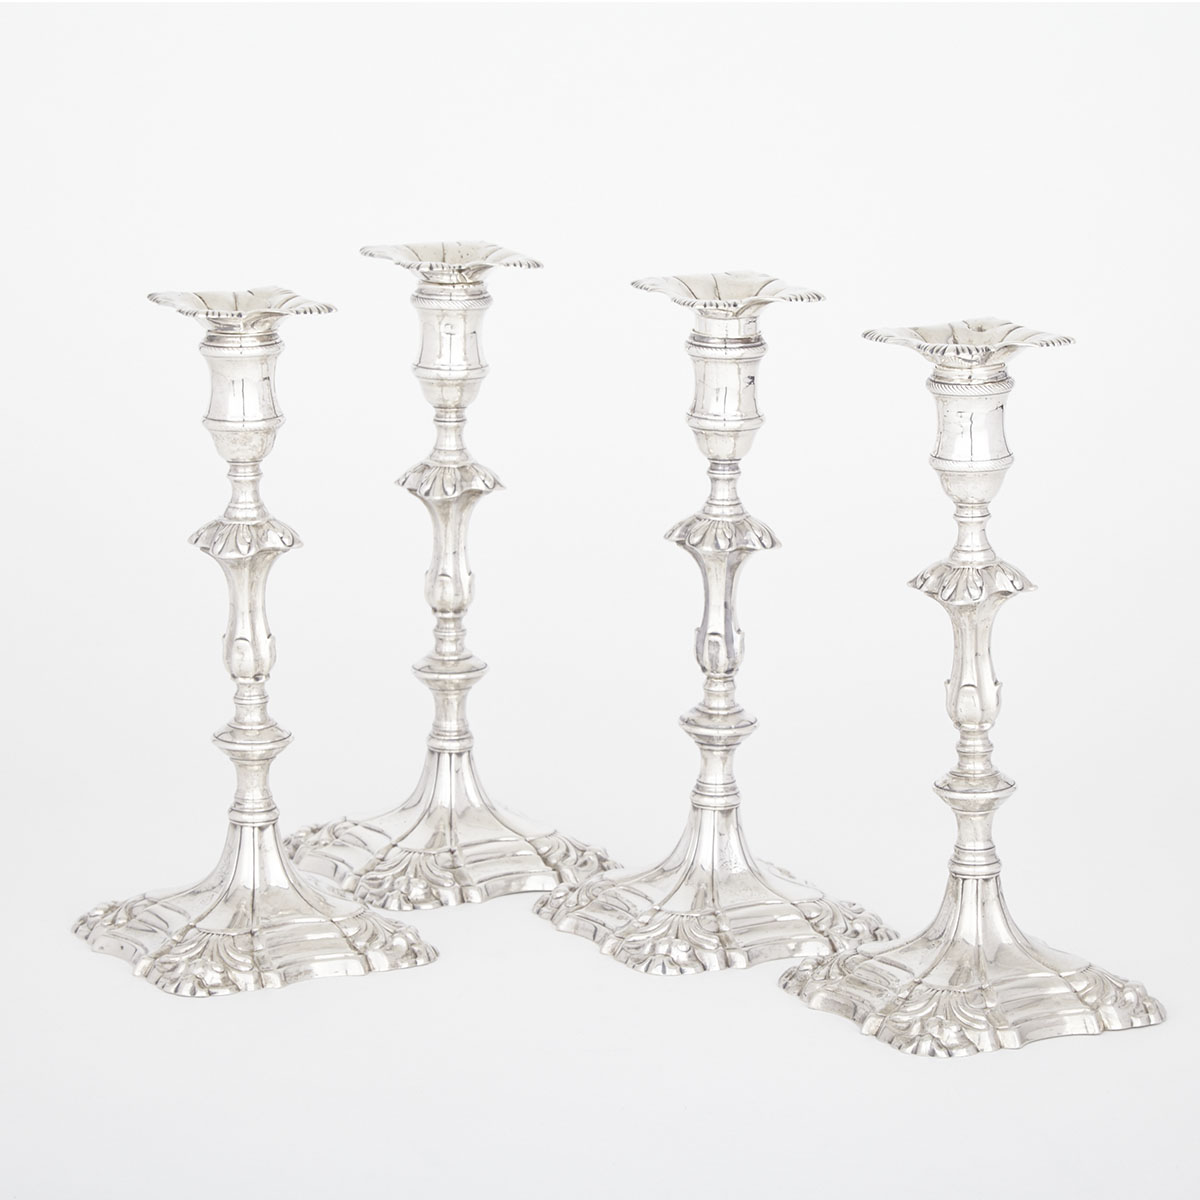 Set of Four George II Silver Table Candlesticks, John Cafe, London, 1756